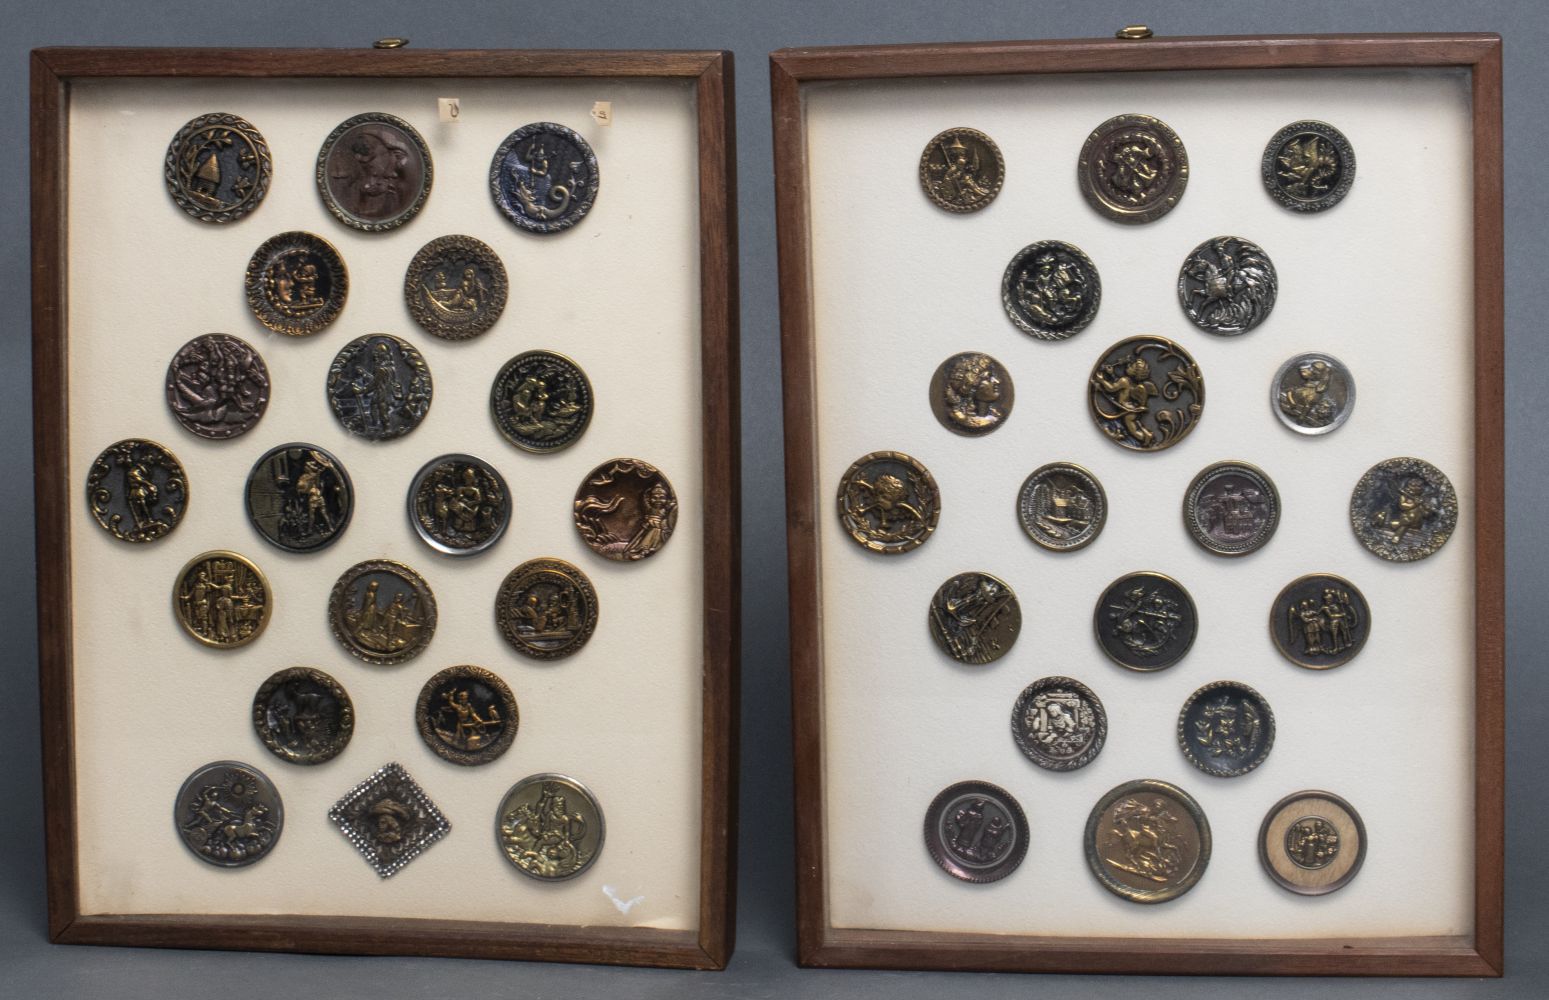 FRAMED COLLECTION OF METAL BUTTONS